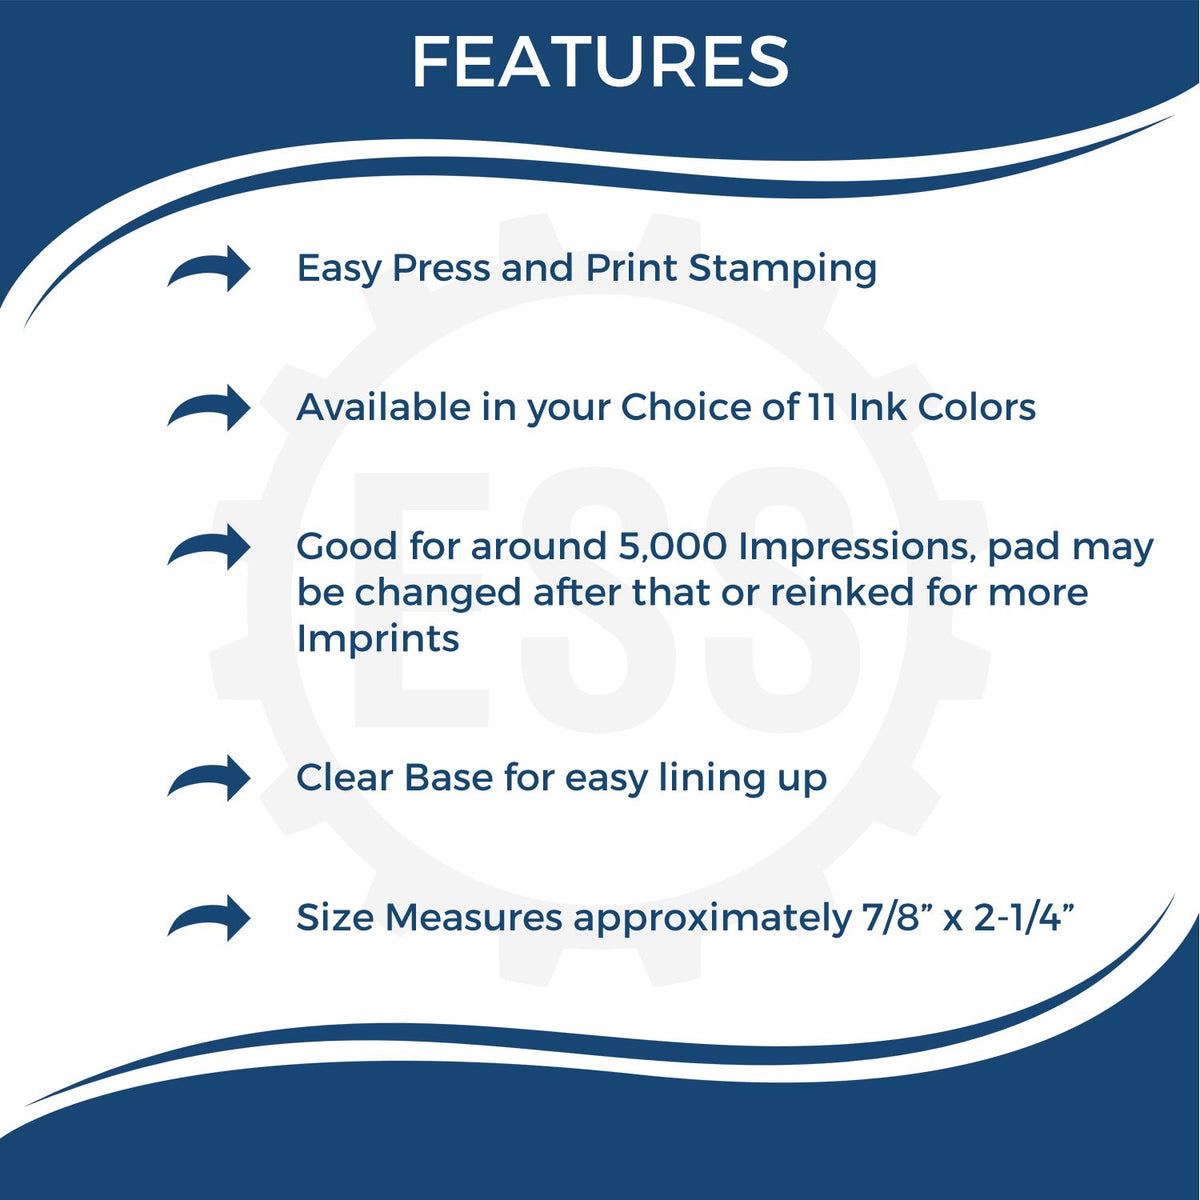 Large Self Inking E-Mail Stamp